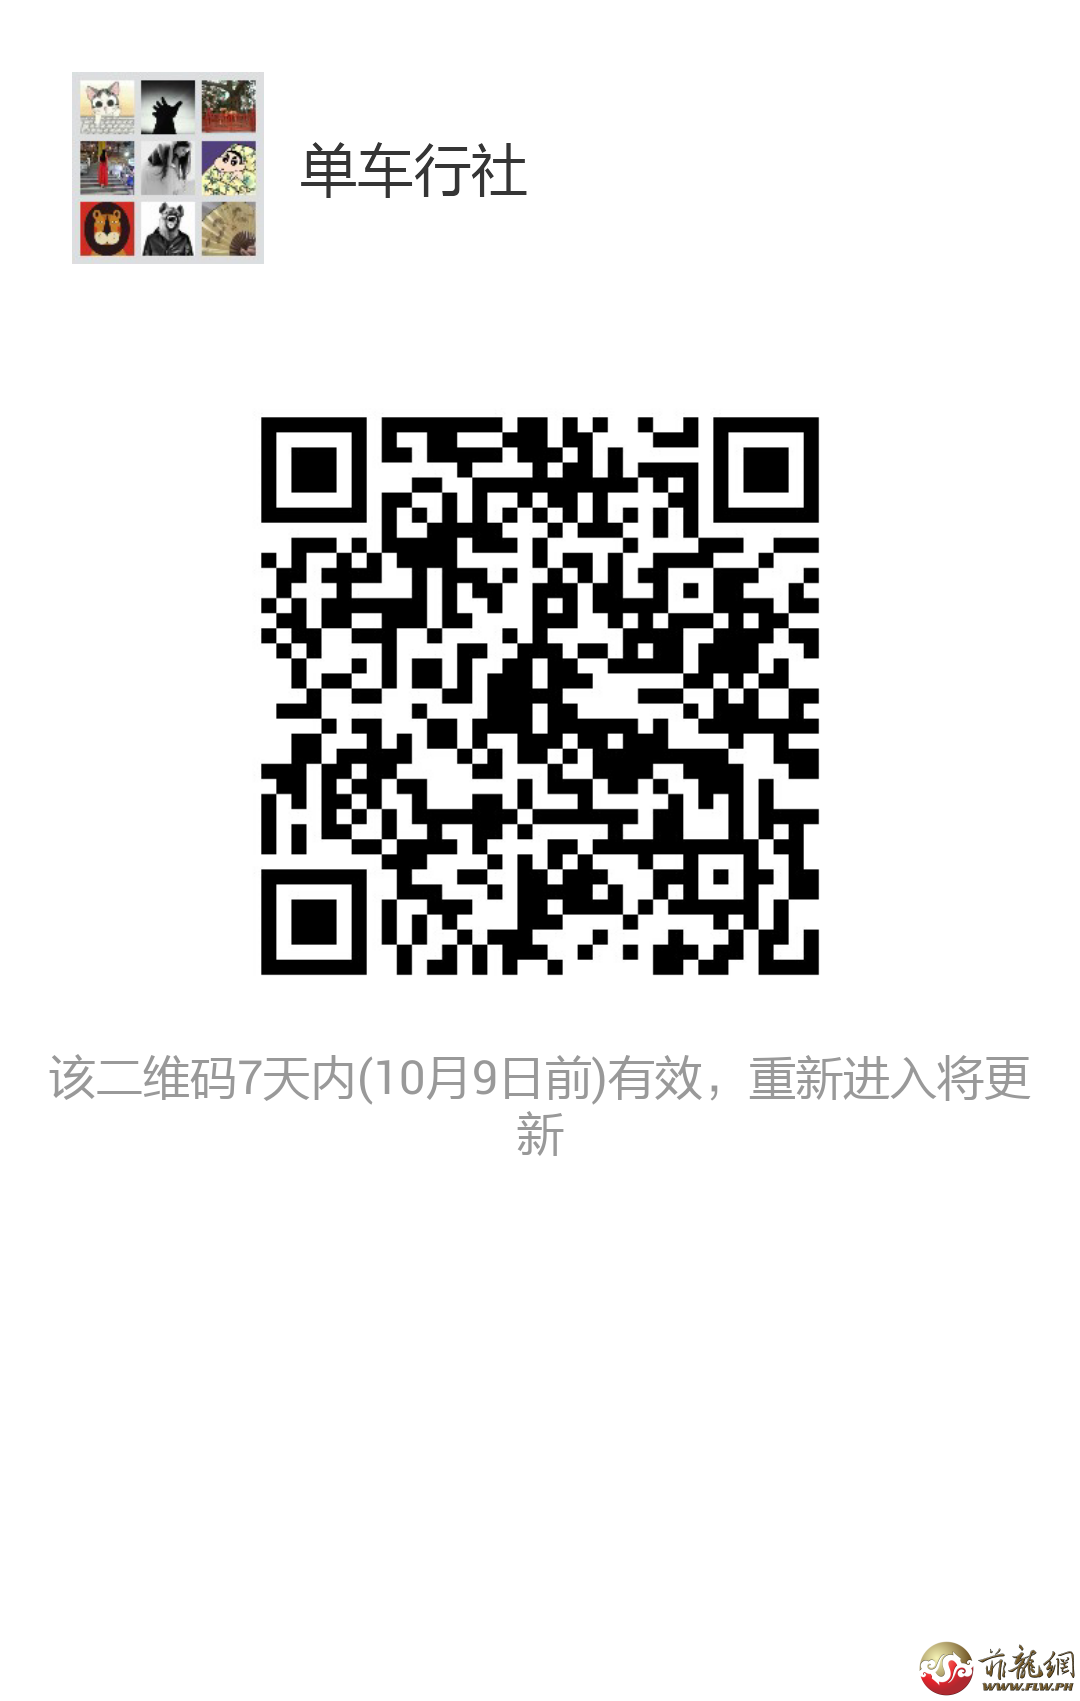 mmqrcode1475391433396.png